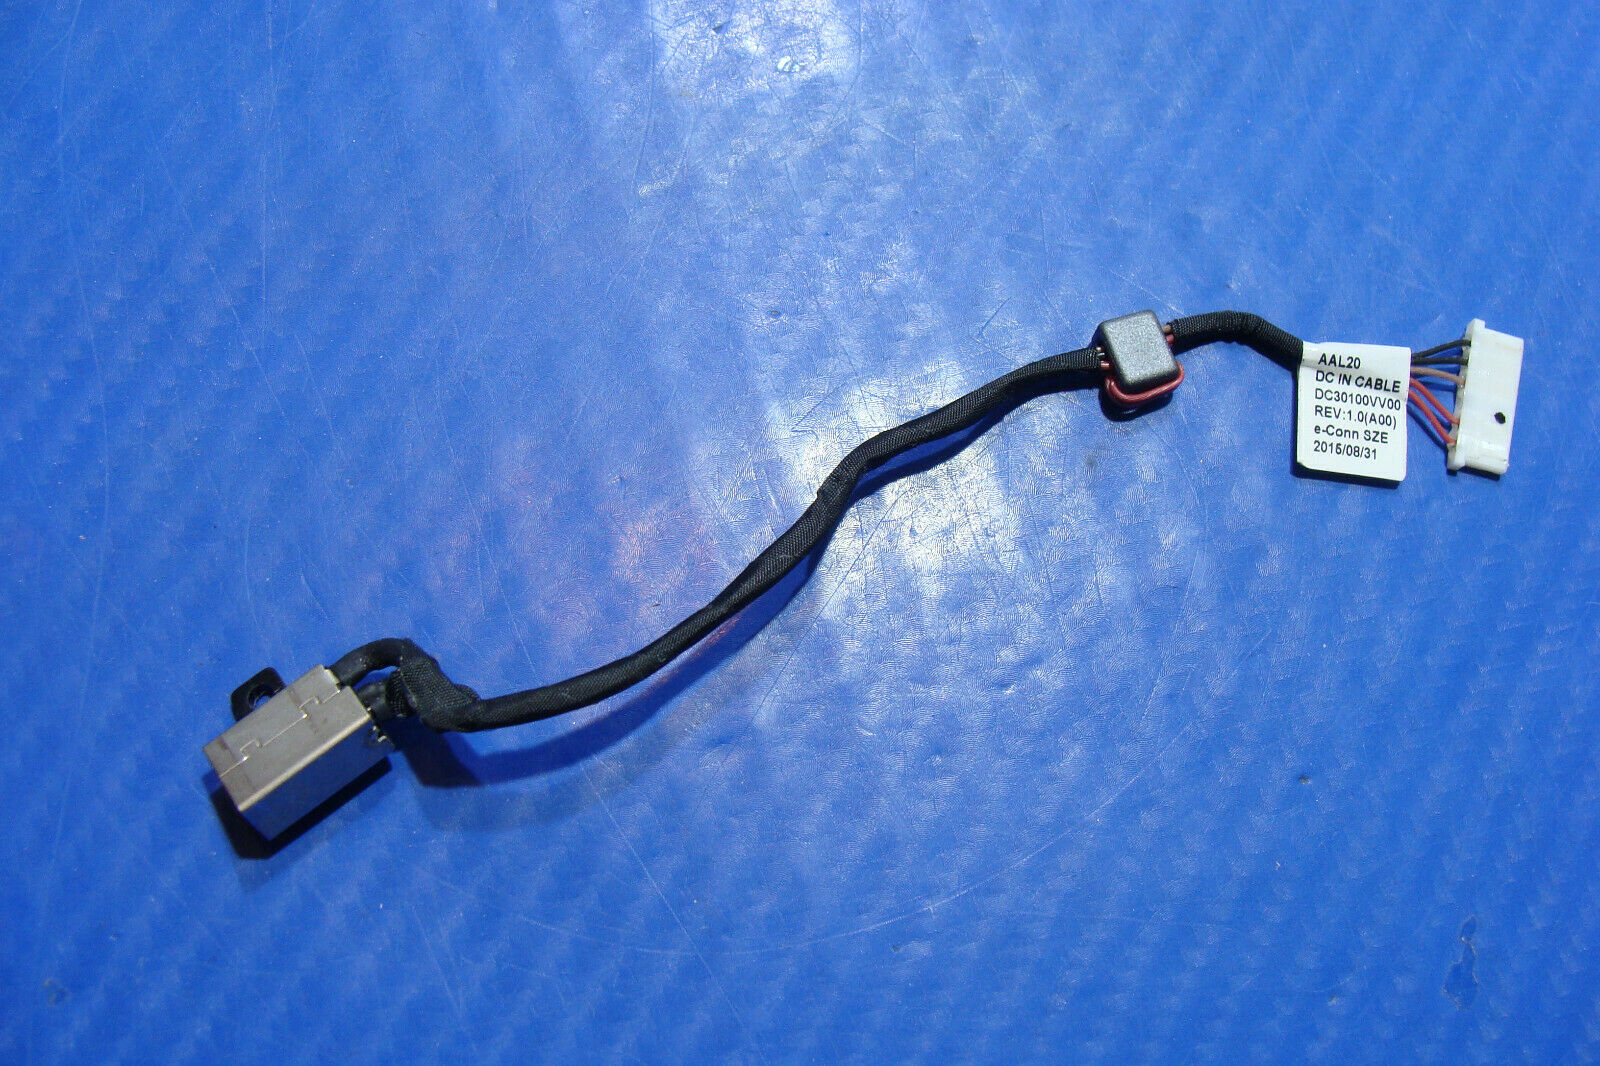 Dell Inspiron 15-5558 15.6" Genuine Laptop DC IN Power Jack w/Cable KD4T9 #1 Dell